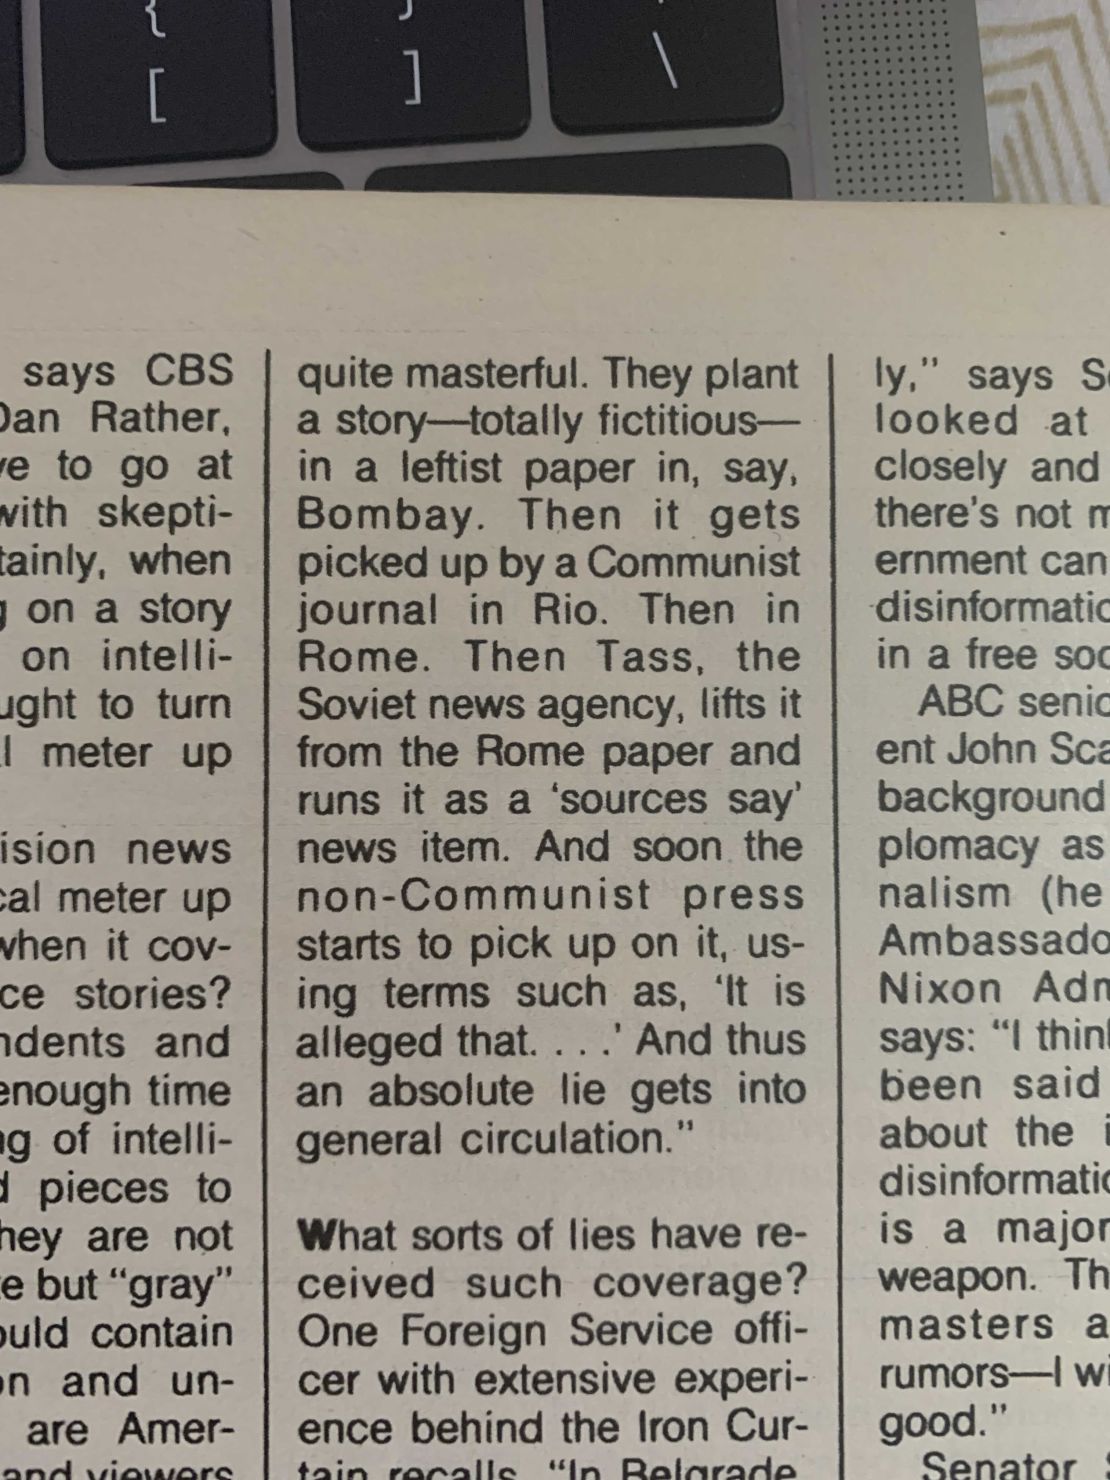 TV Guide outlines how Russian disinformation worked in 1982; in 2016, Russian internet trolls used similar strategies. 